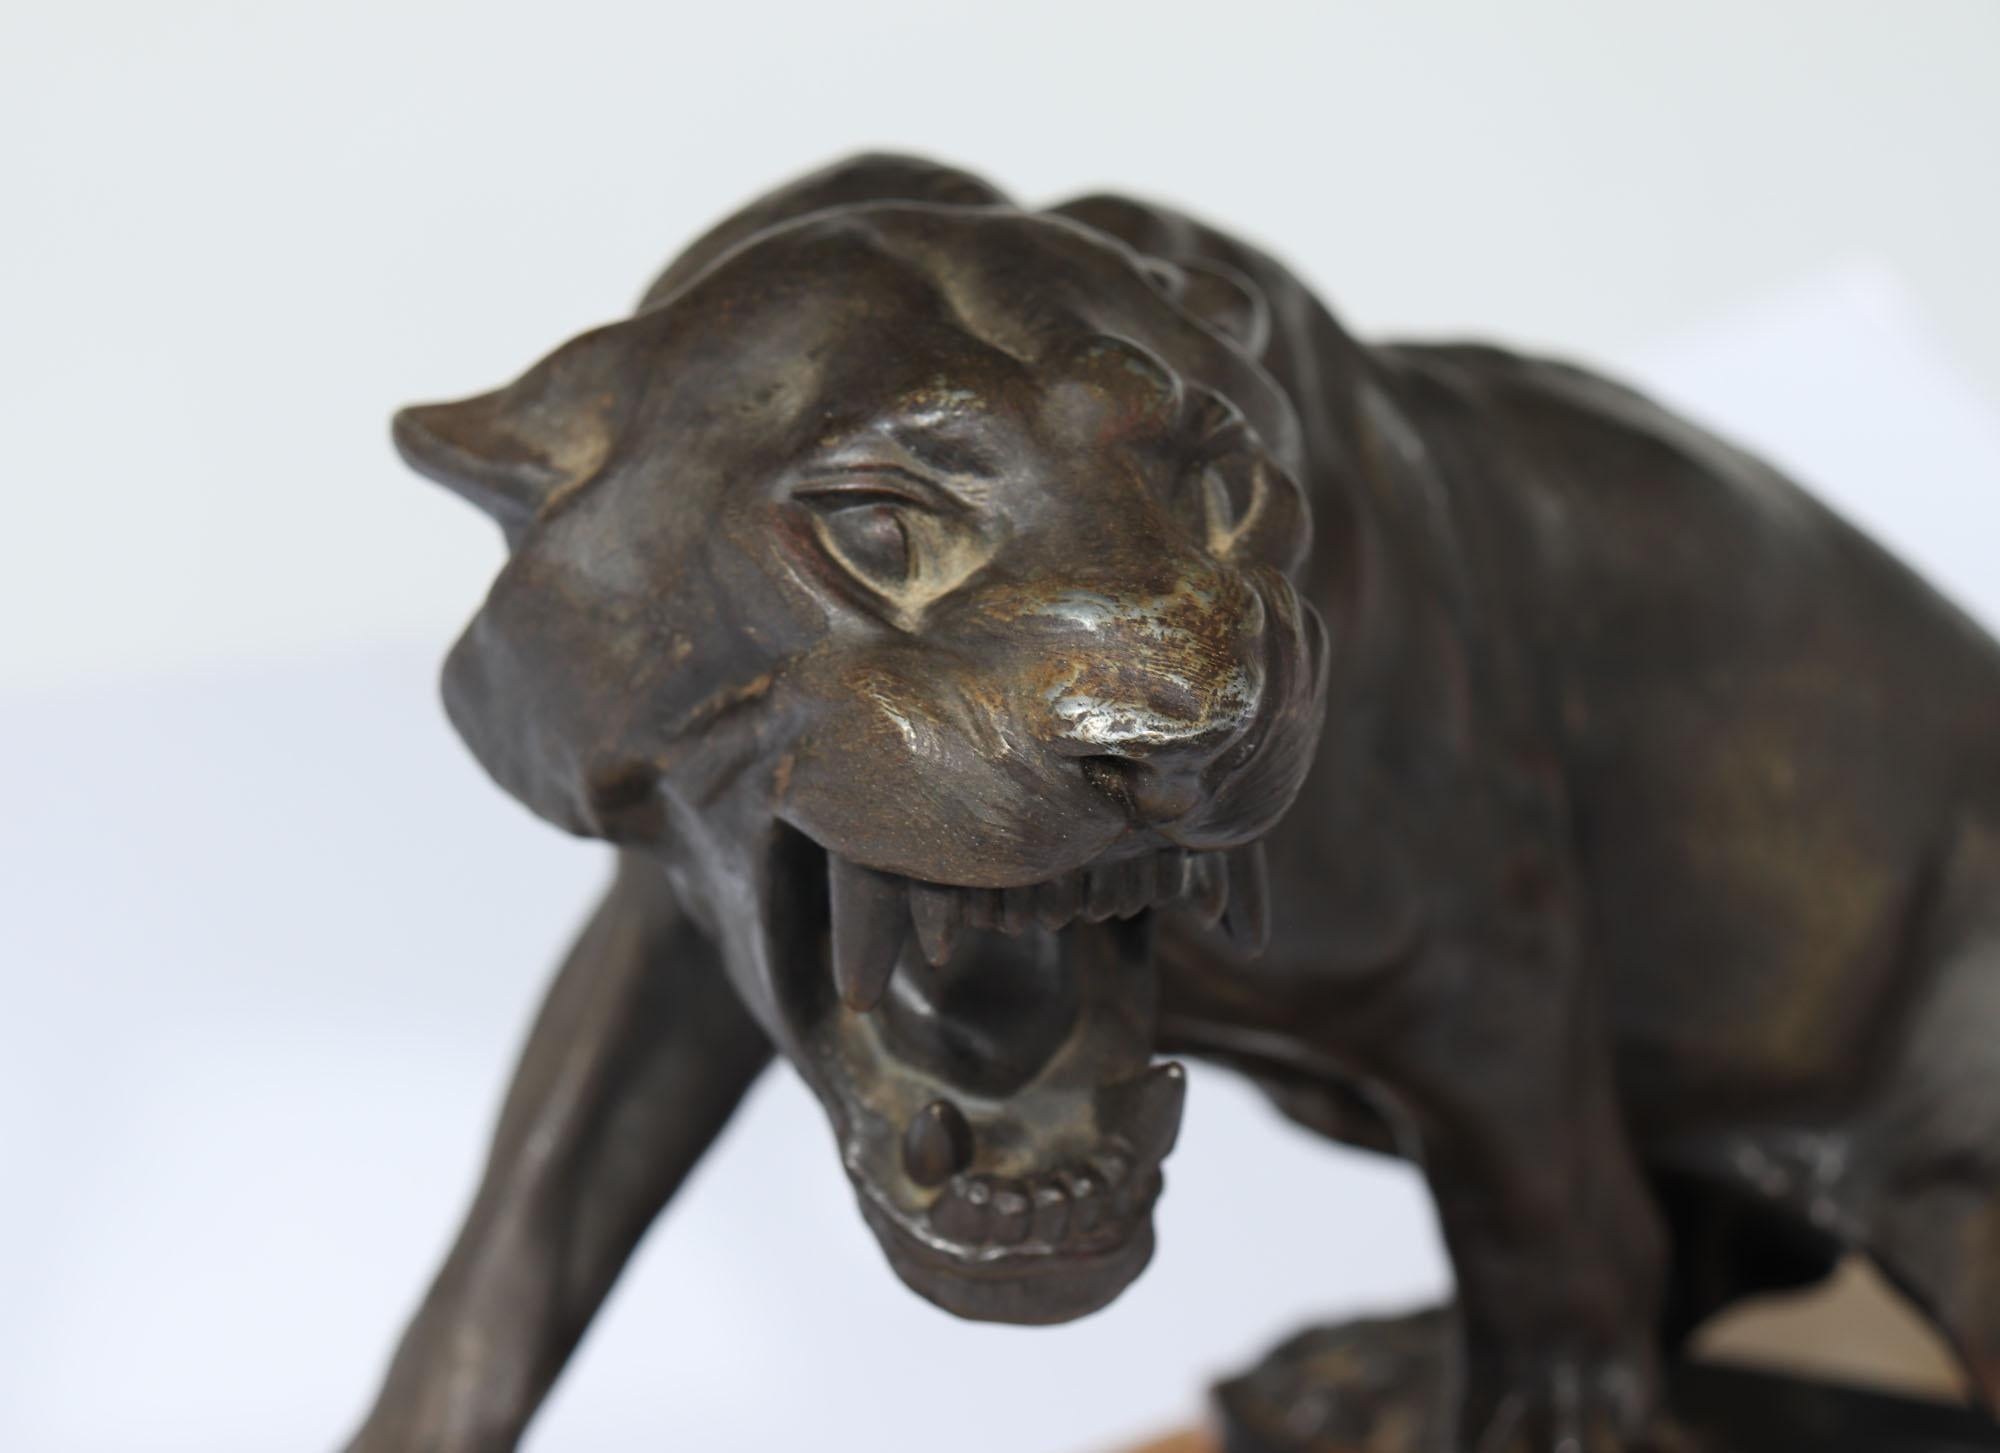 ART DECO PATINATED BRONZE TIGER 
A stunning patinated spelter sculpture of a fierce, roaring feline that embodies exceptional realism and expression. This masterpiece is expertly crafted to captivate the eye and evoke a sense of power and strength.